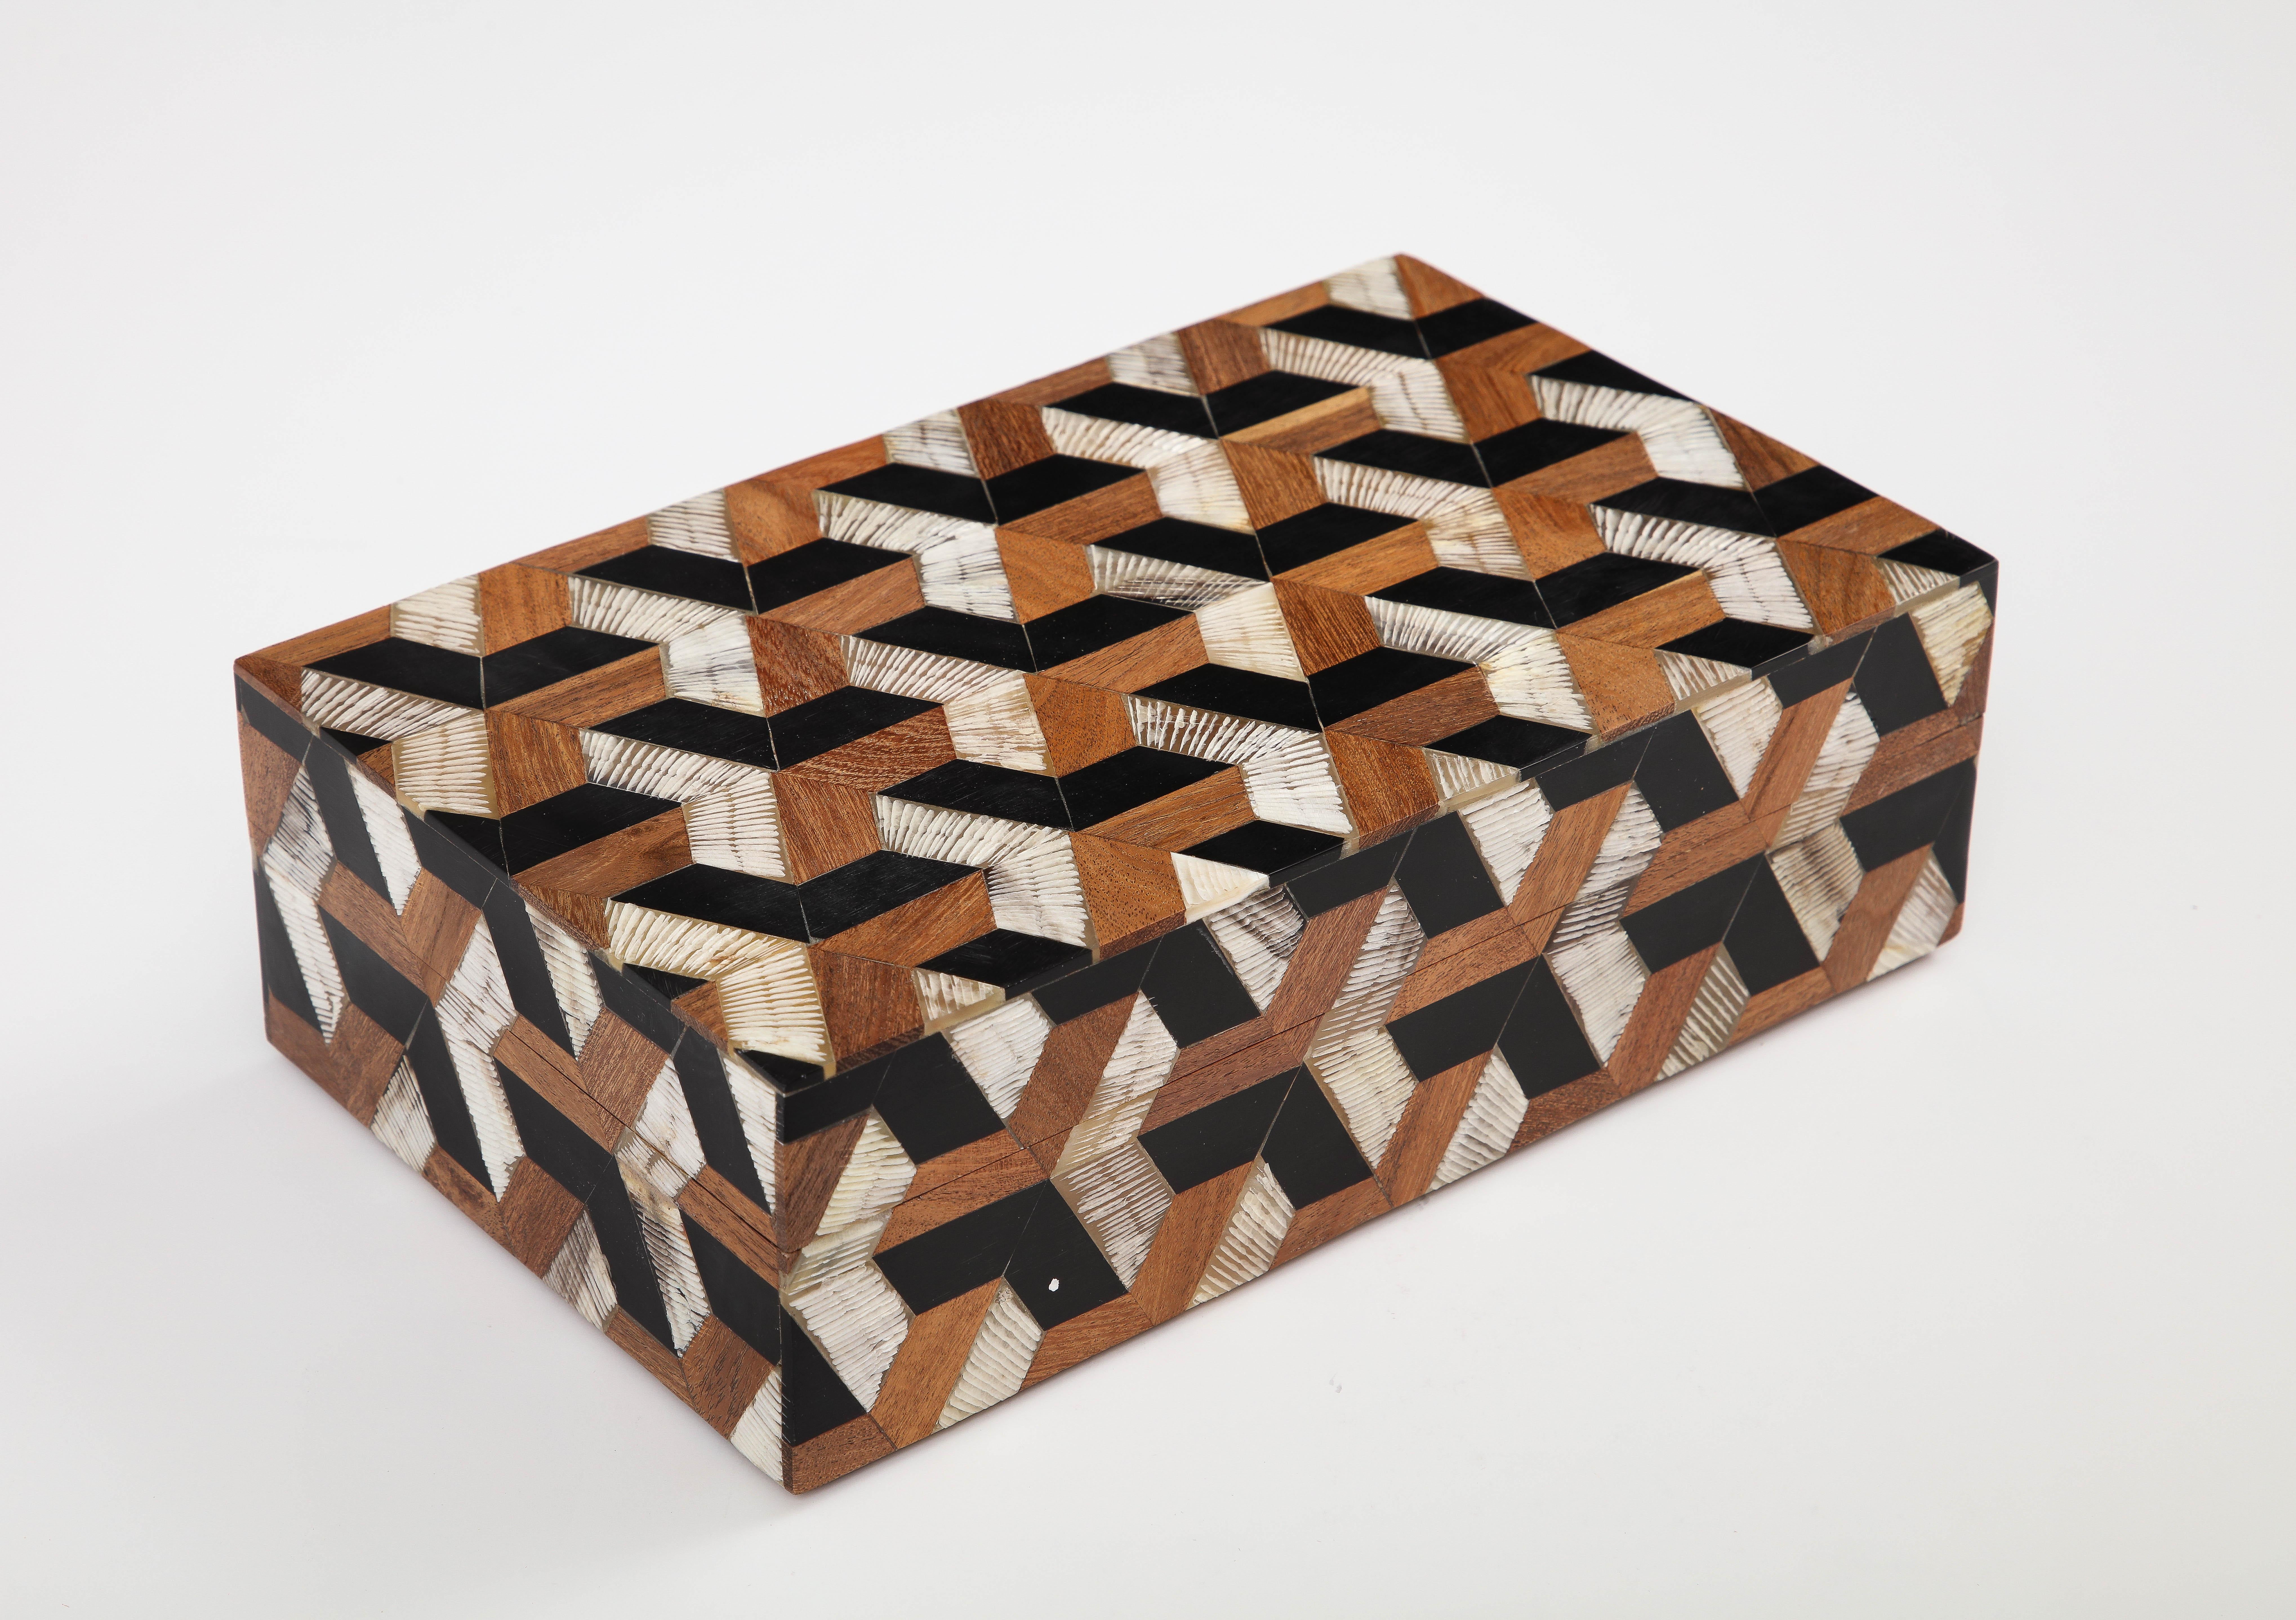 Decorative keepsake, document box featuring hand inlaid bone, wood and horn veneers in a Goyard inspired pattern. A great storage solution for your desk, coffee table or dresser top.